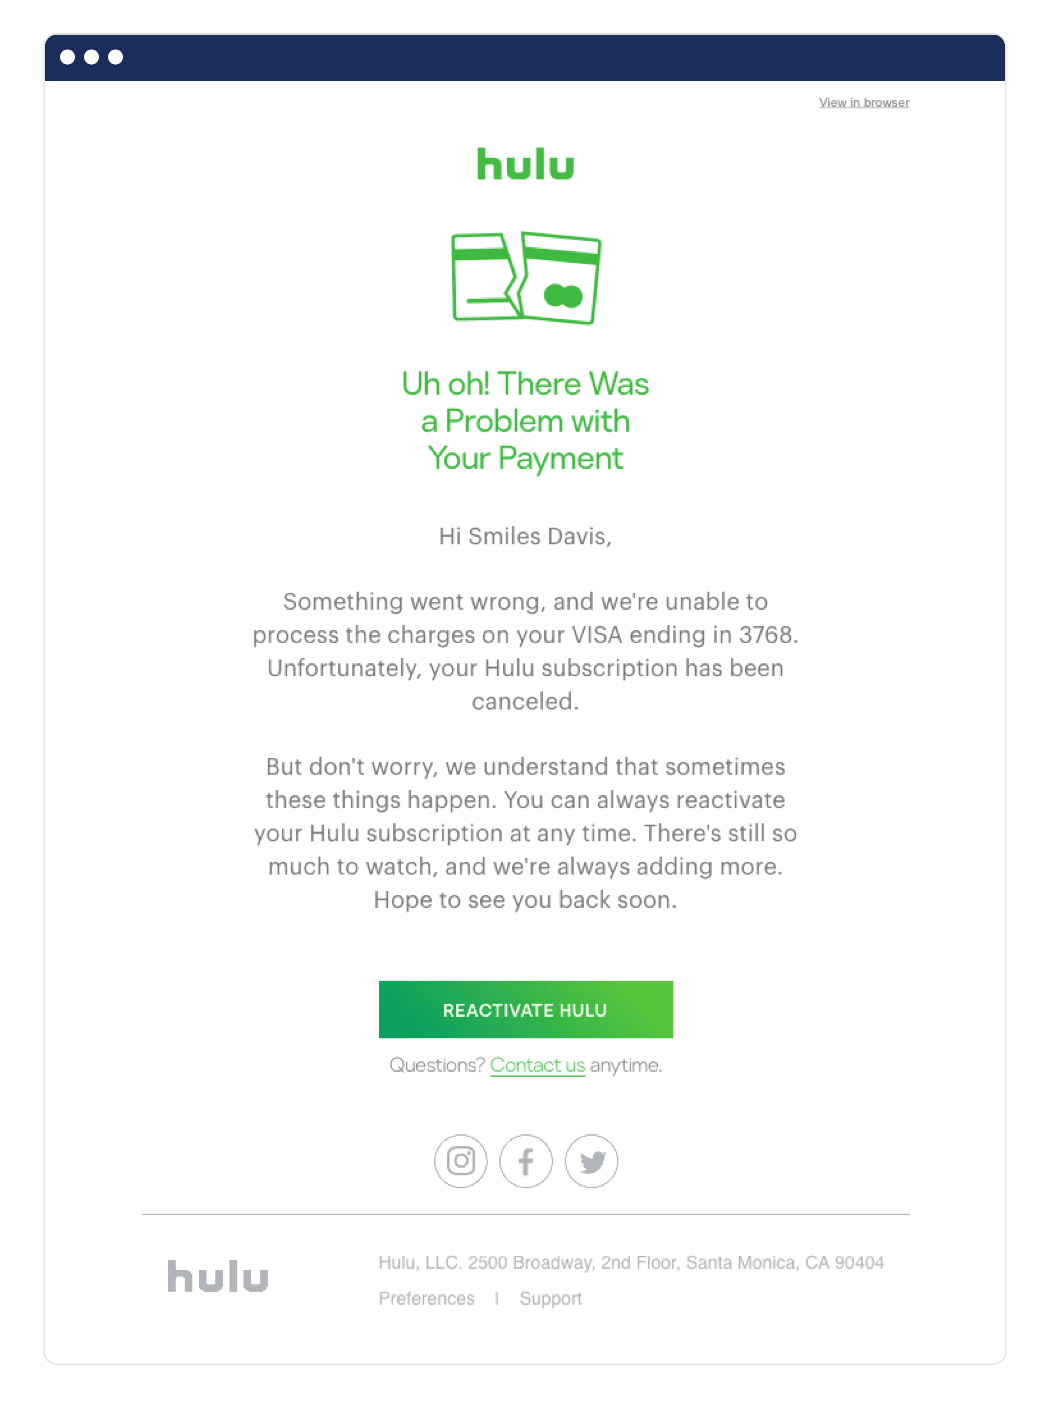 Hulu email example